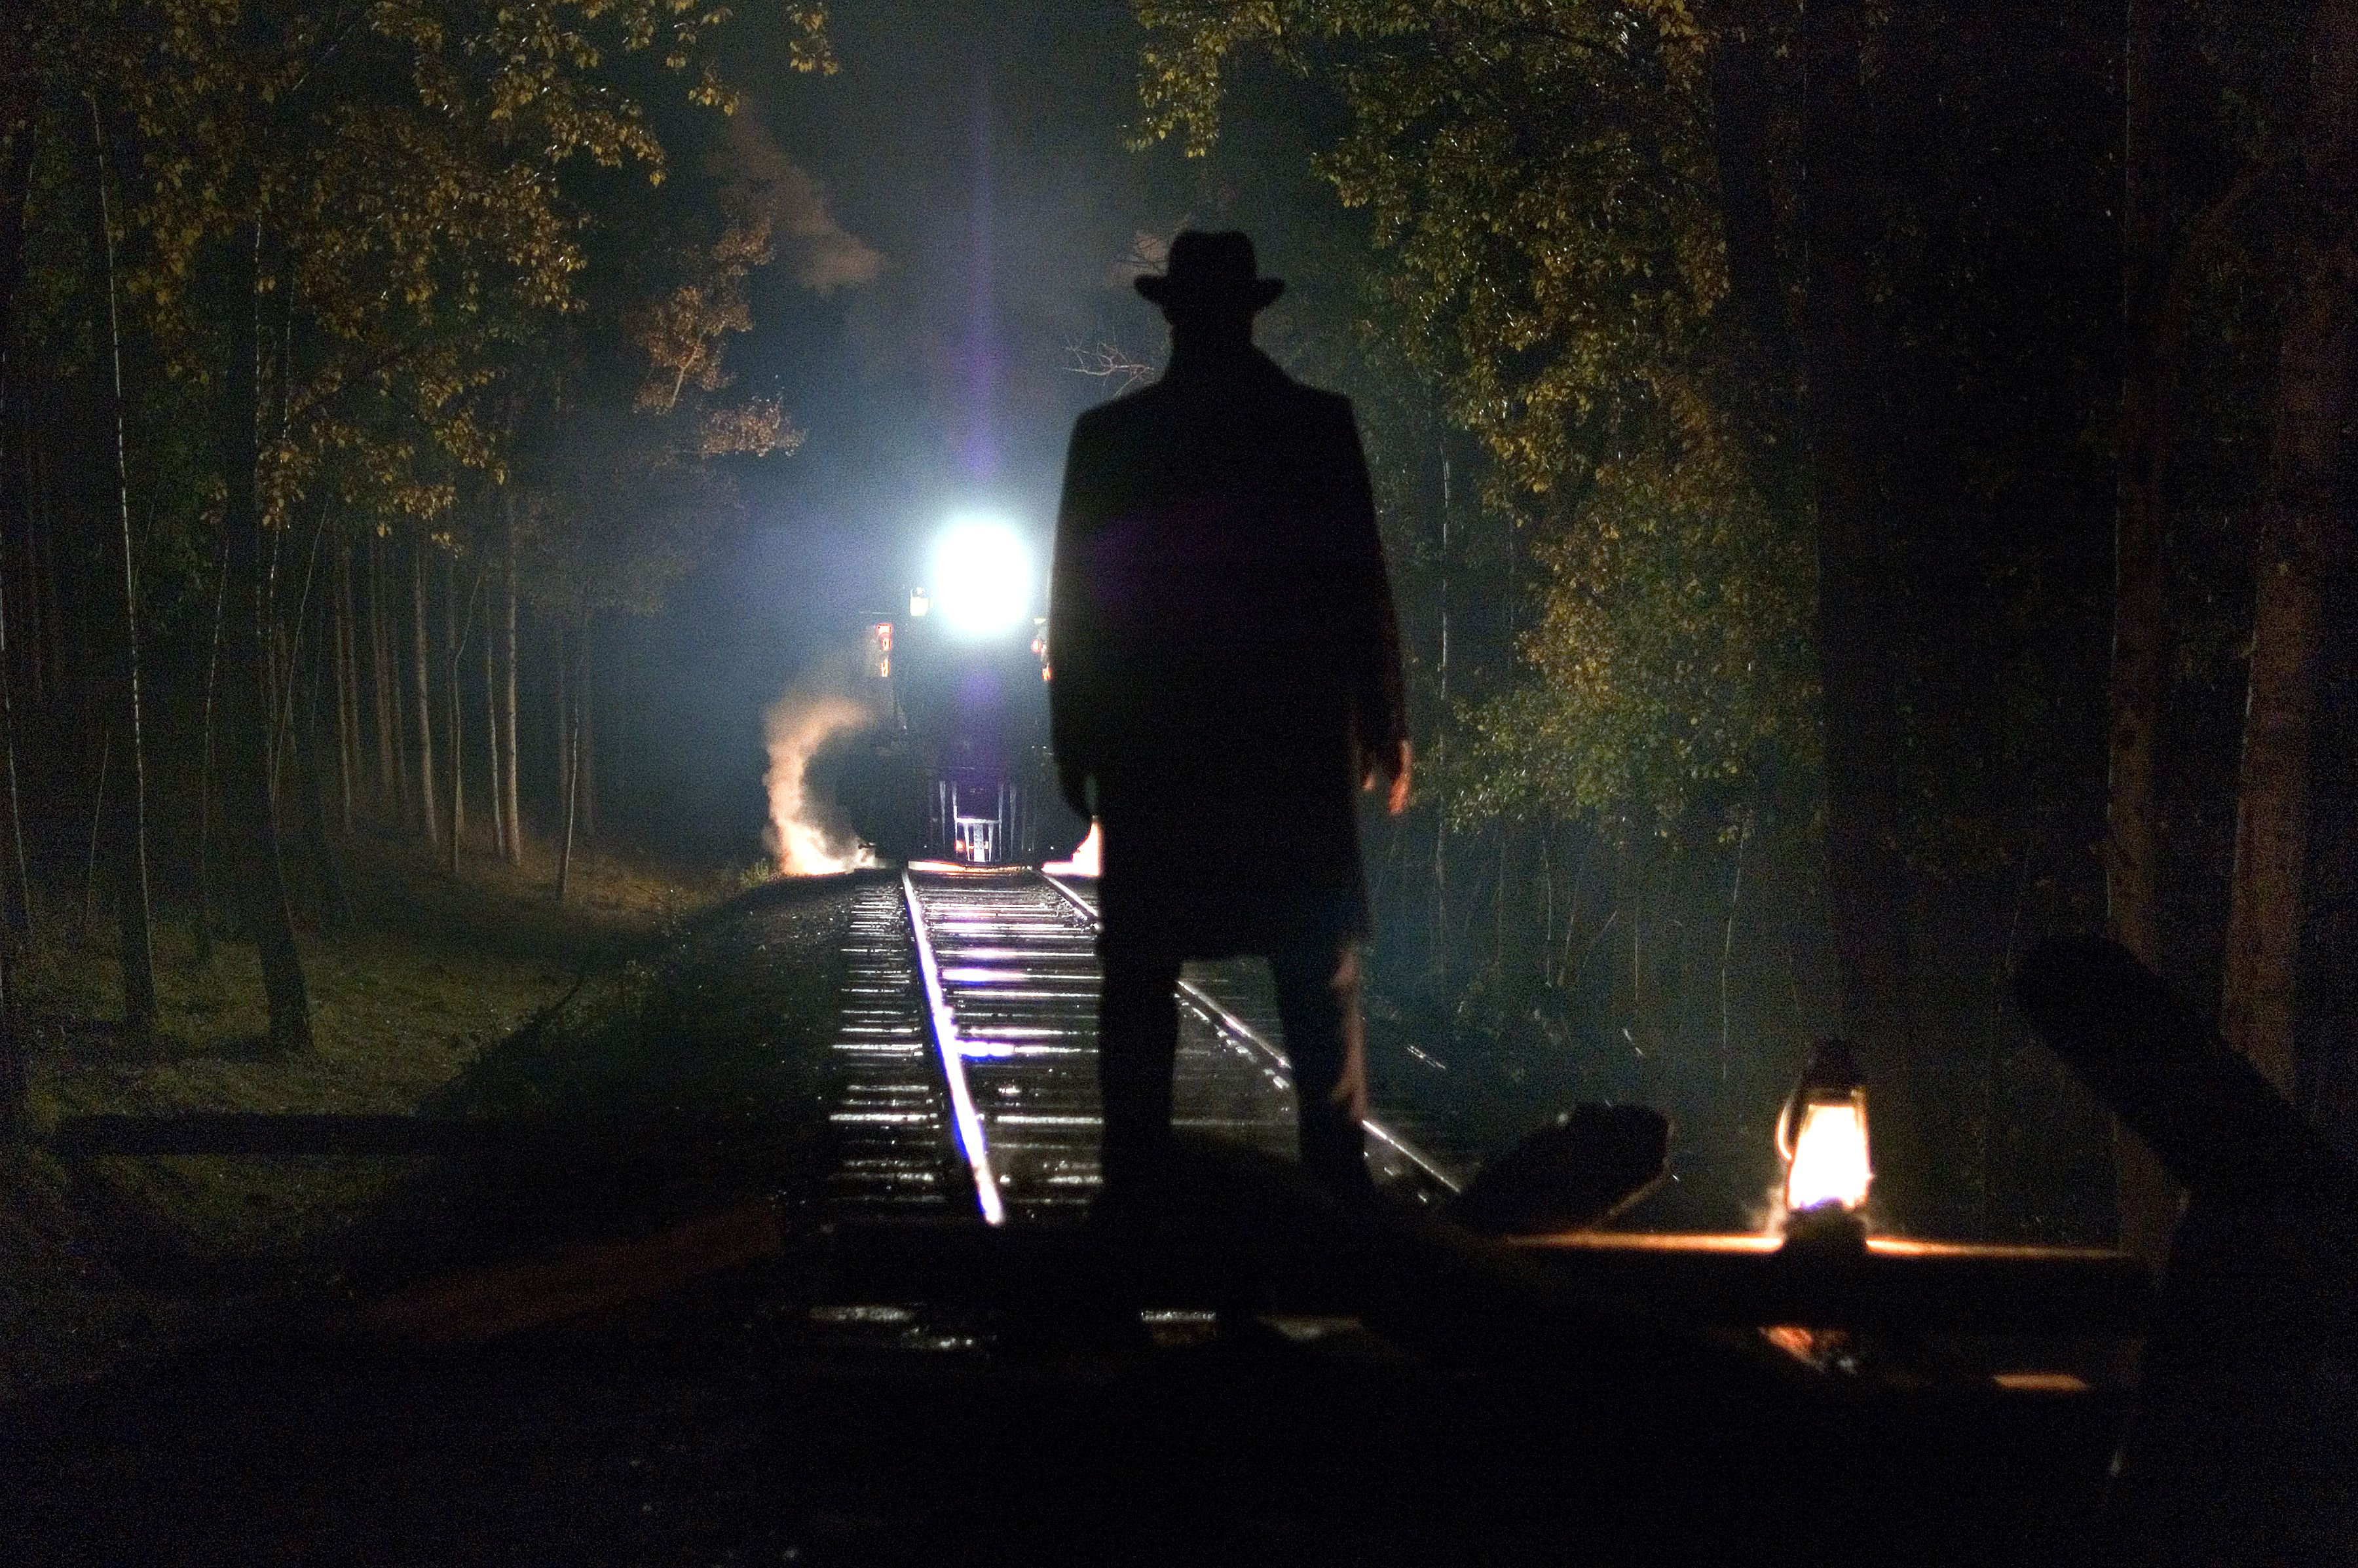 THE ASSASSINATION OF JESSE JAMES BY THE COWARD ROBERT FORD, Brad Pitt as Jesse James, 2007. ©Warner Bros./Courtesy Everett Collection